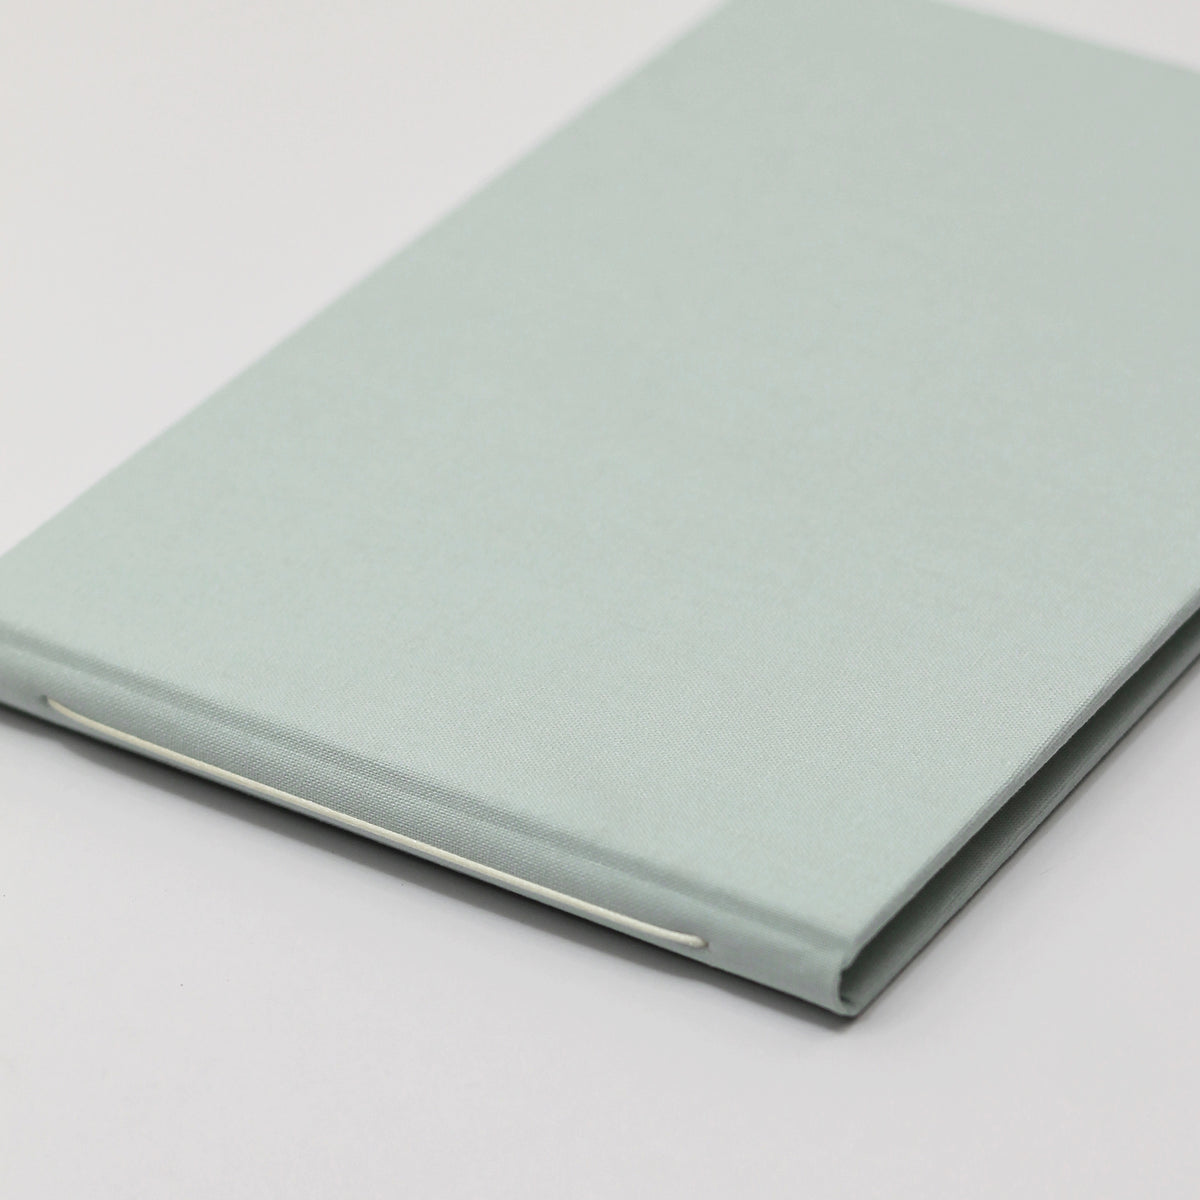 Guestbook Embossed with “Guests” with Pastel Blue Cotton Cover